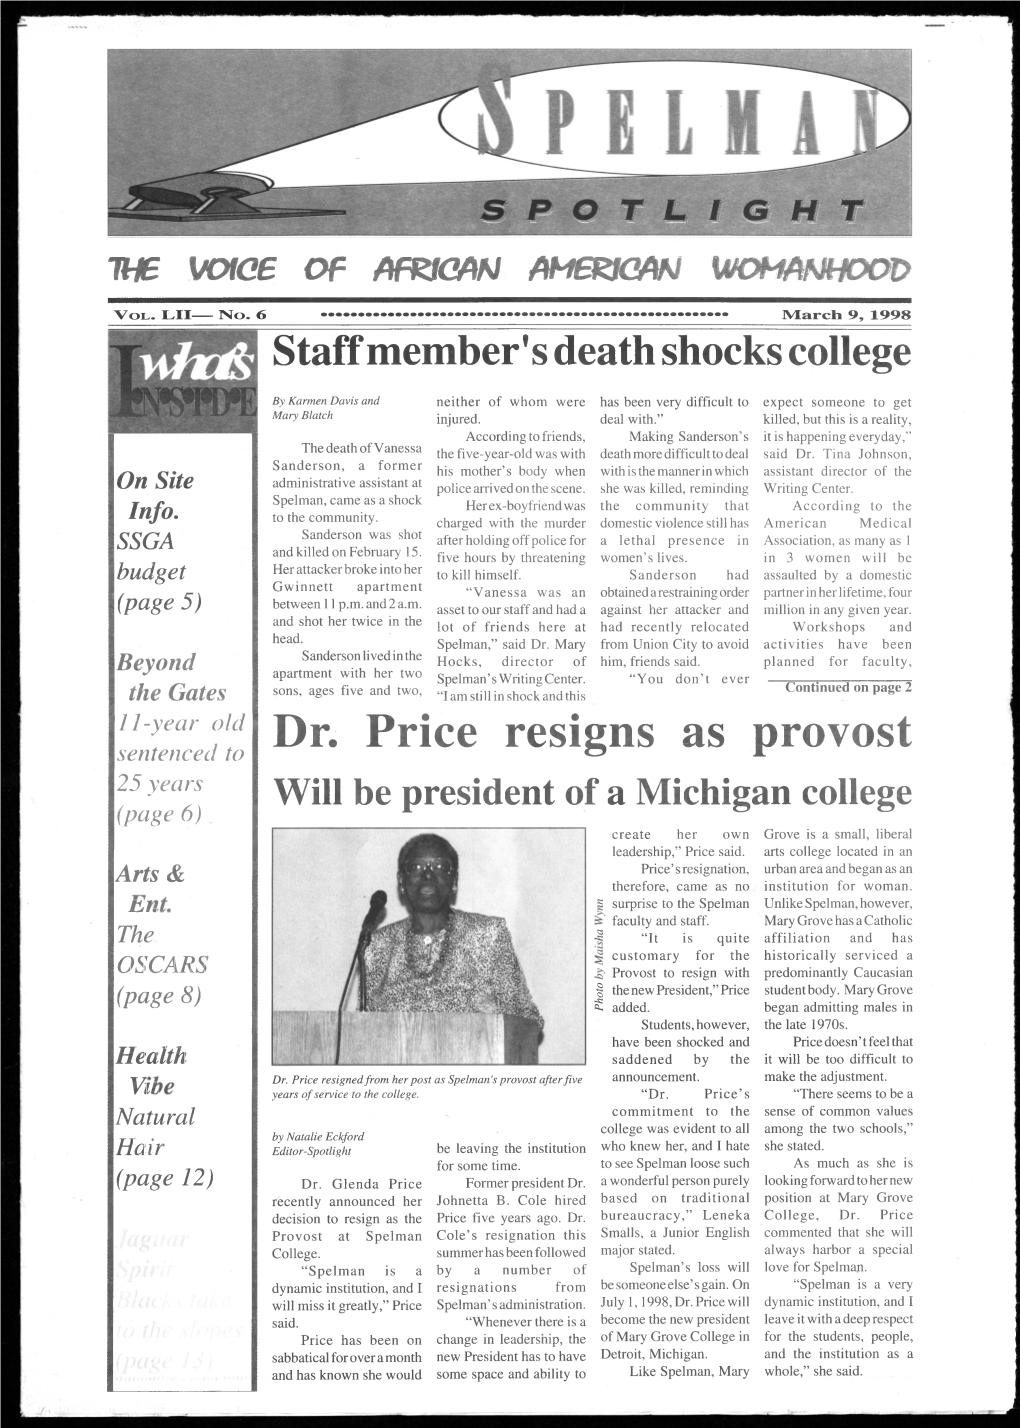 Dr. Price Resigns As Provost 25 Years Will Be President of a Michigan College (Page 6) Create Her Own Grove Is a Small, Liberal Leadership,” Price Said